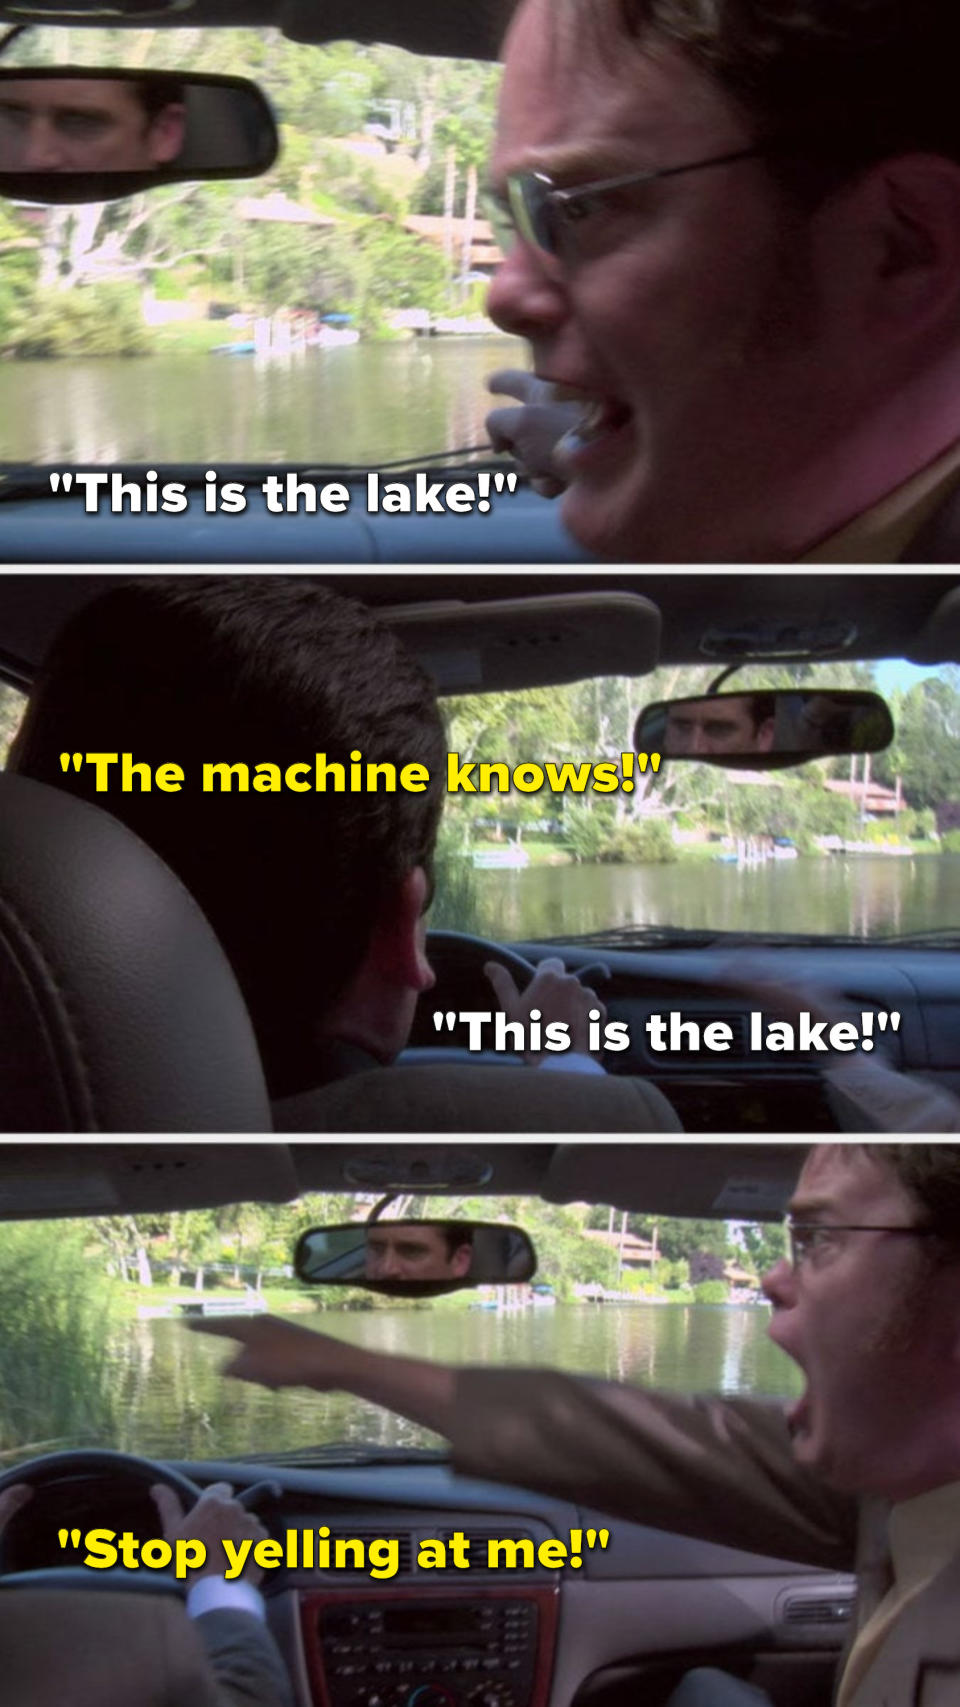 On The Office, in a car, Dwight yells, This is the lake, Michael yells, The machine knows, Dwight yells, This is the lake, and Michael yells, Stop yelling at me